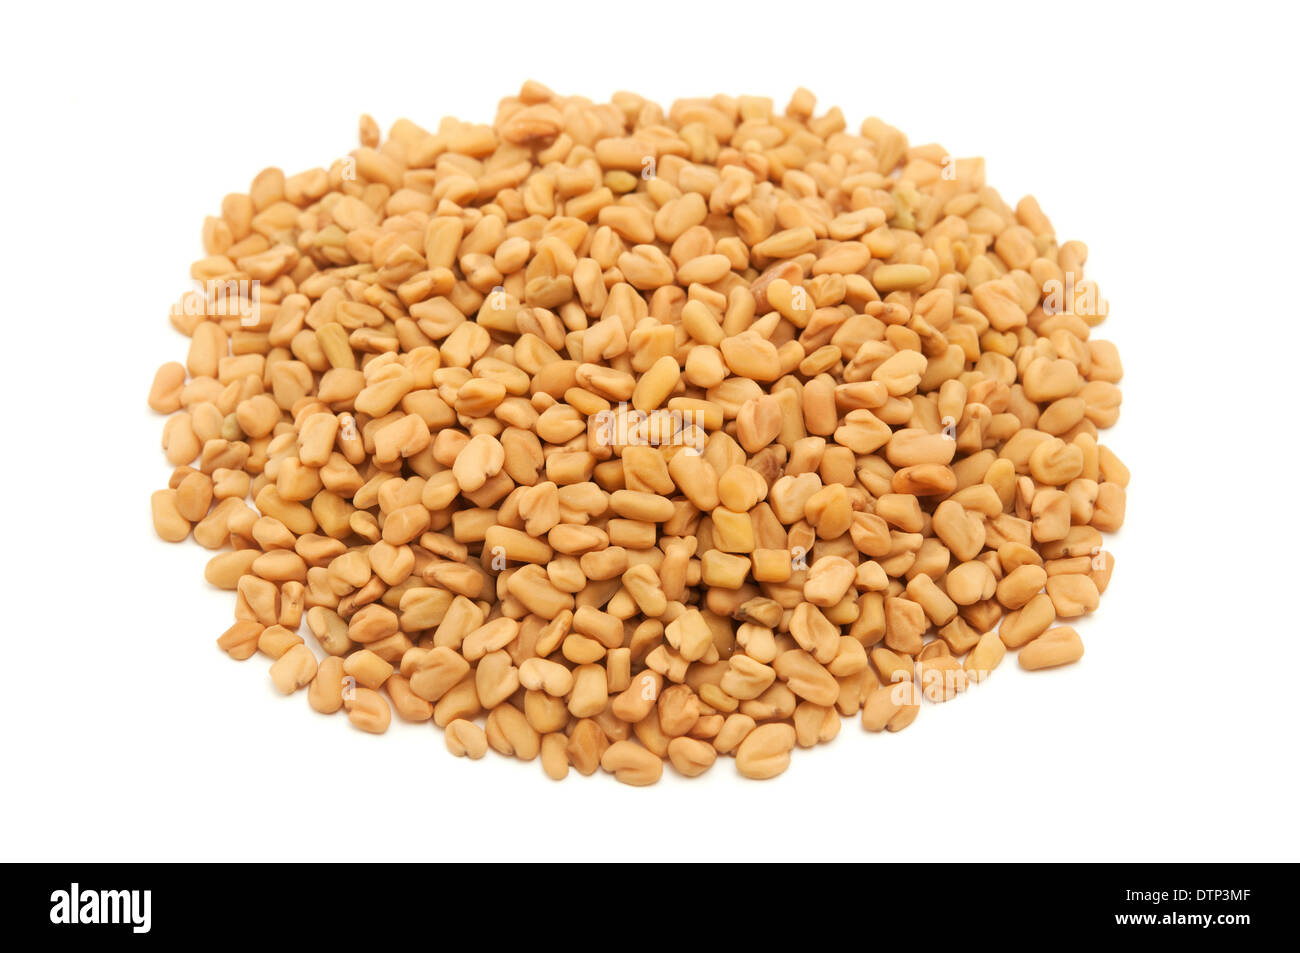 Dried fenugreek seeds on a white background Stock Photo